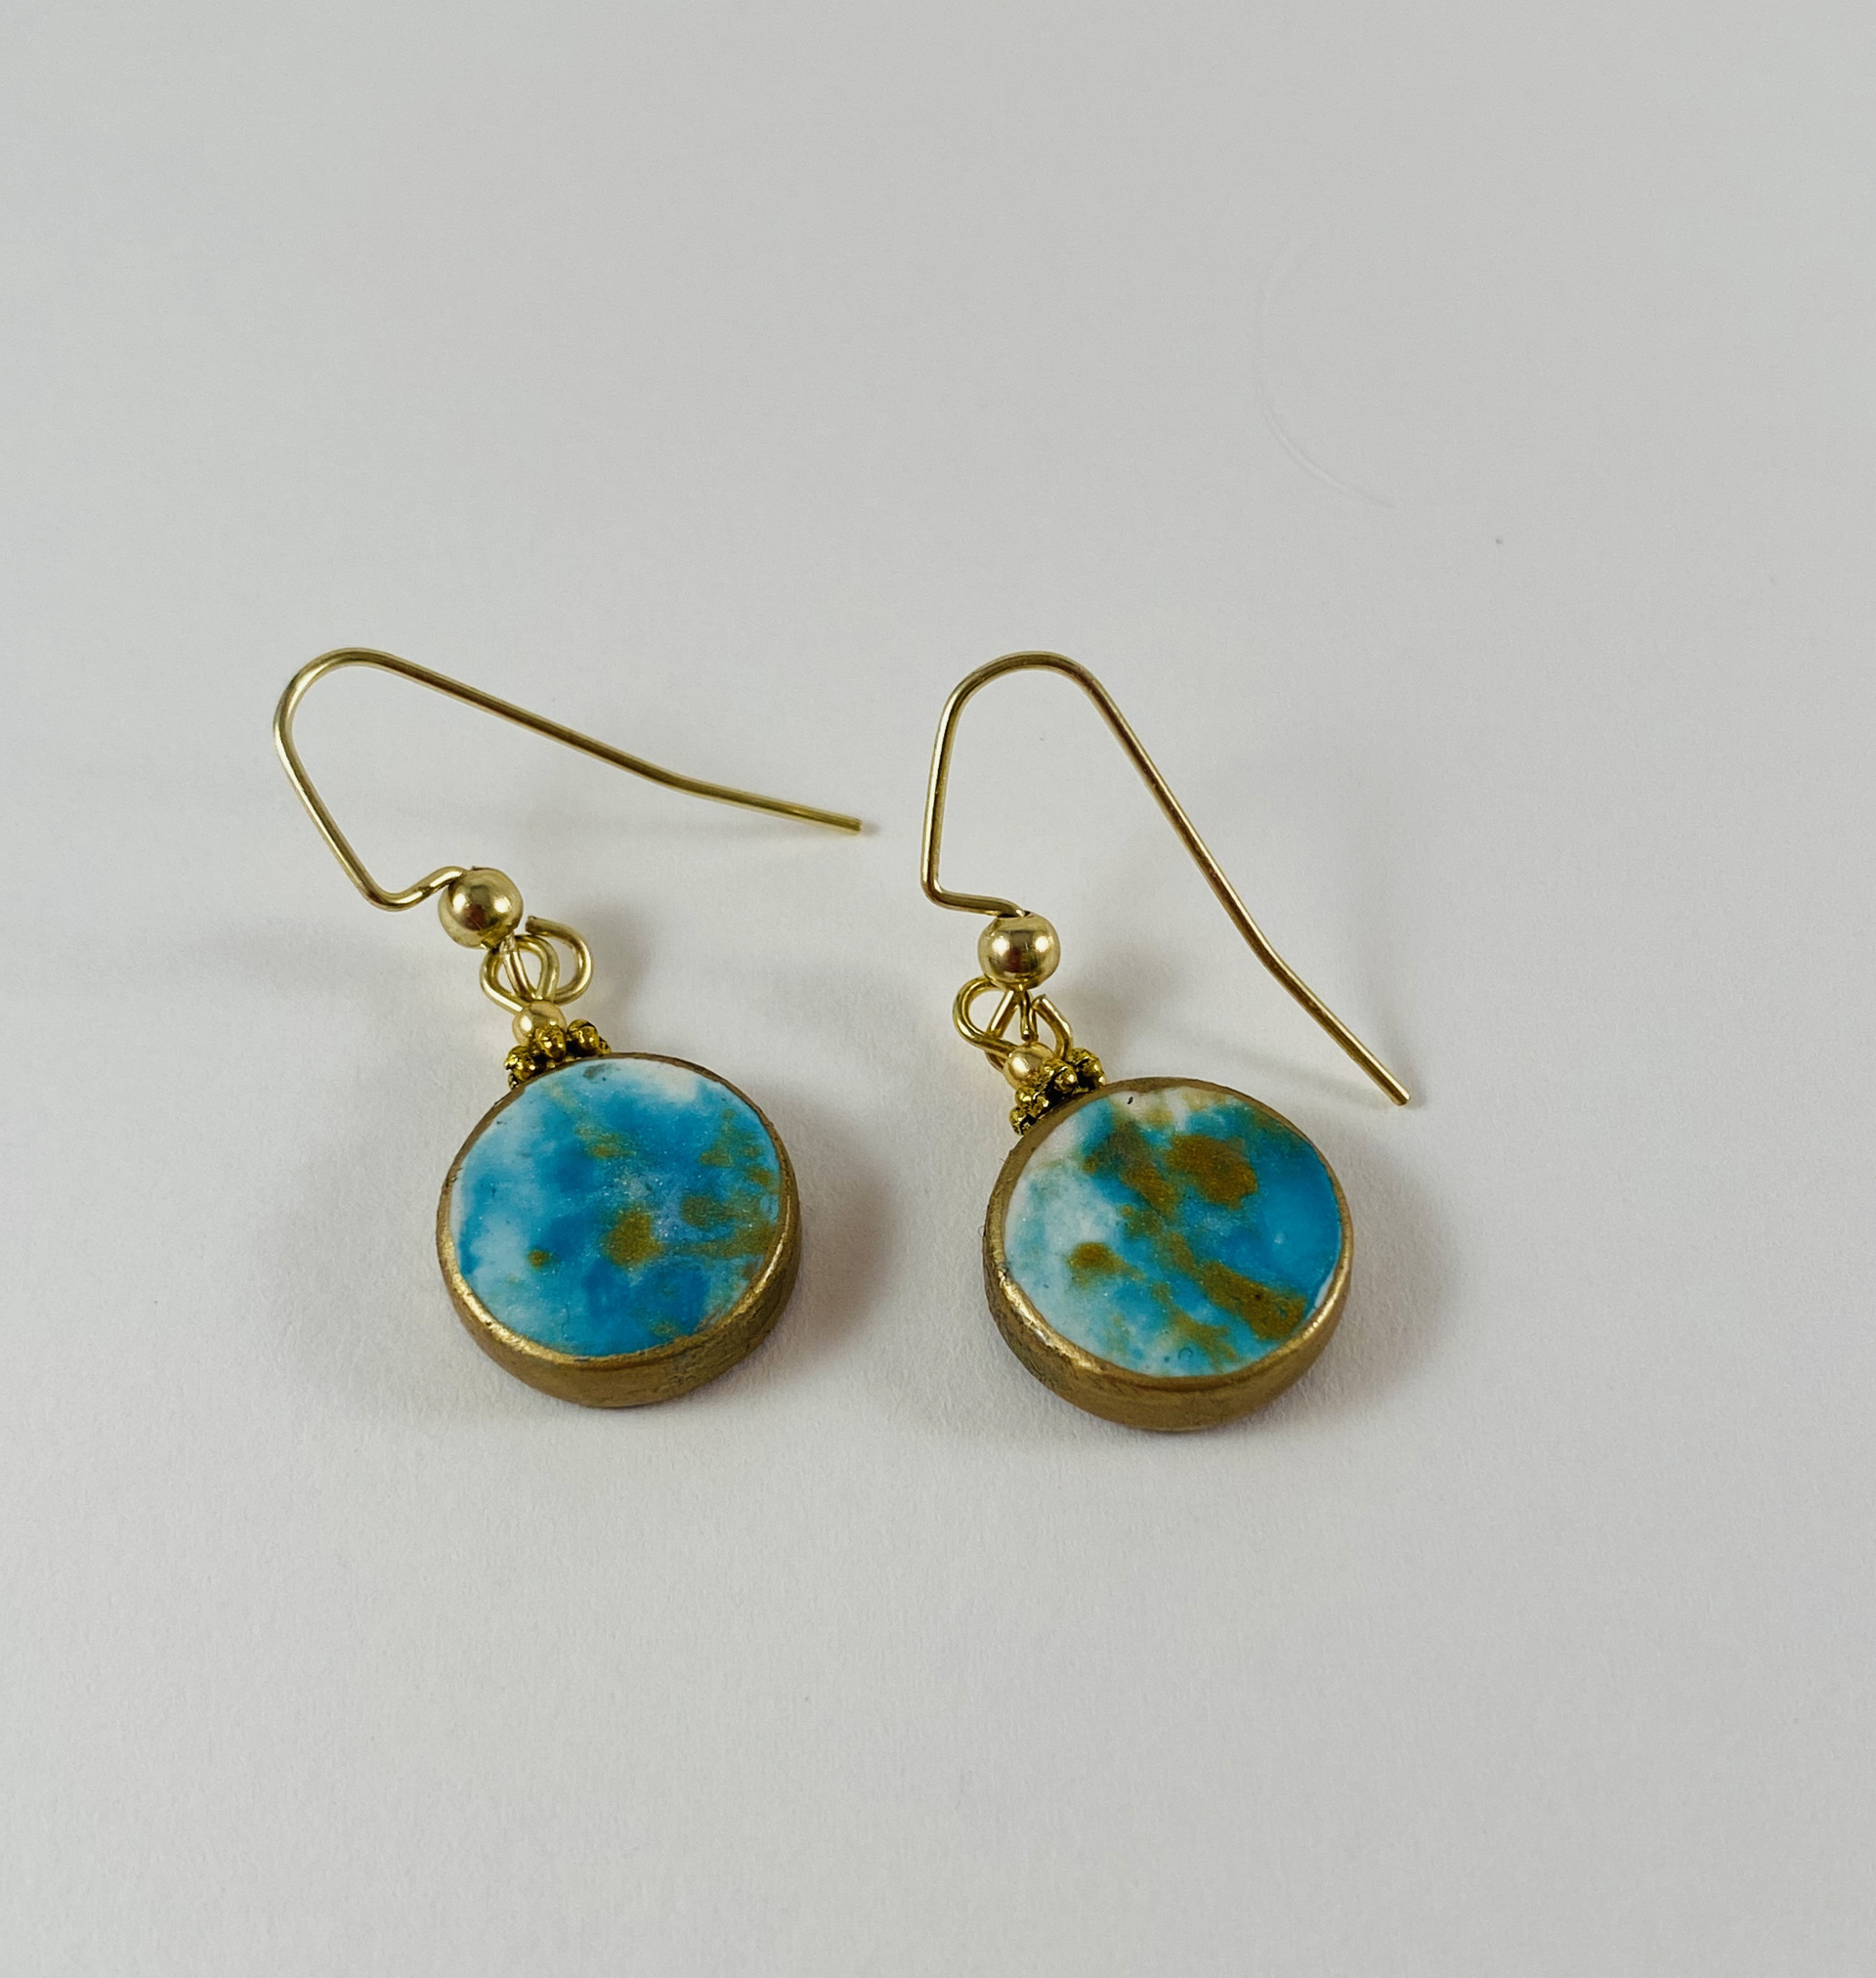 Gold and Teal earrings by Nancy Roth